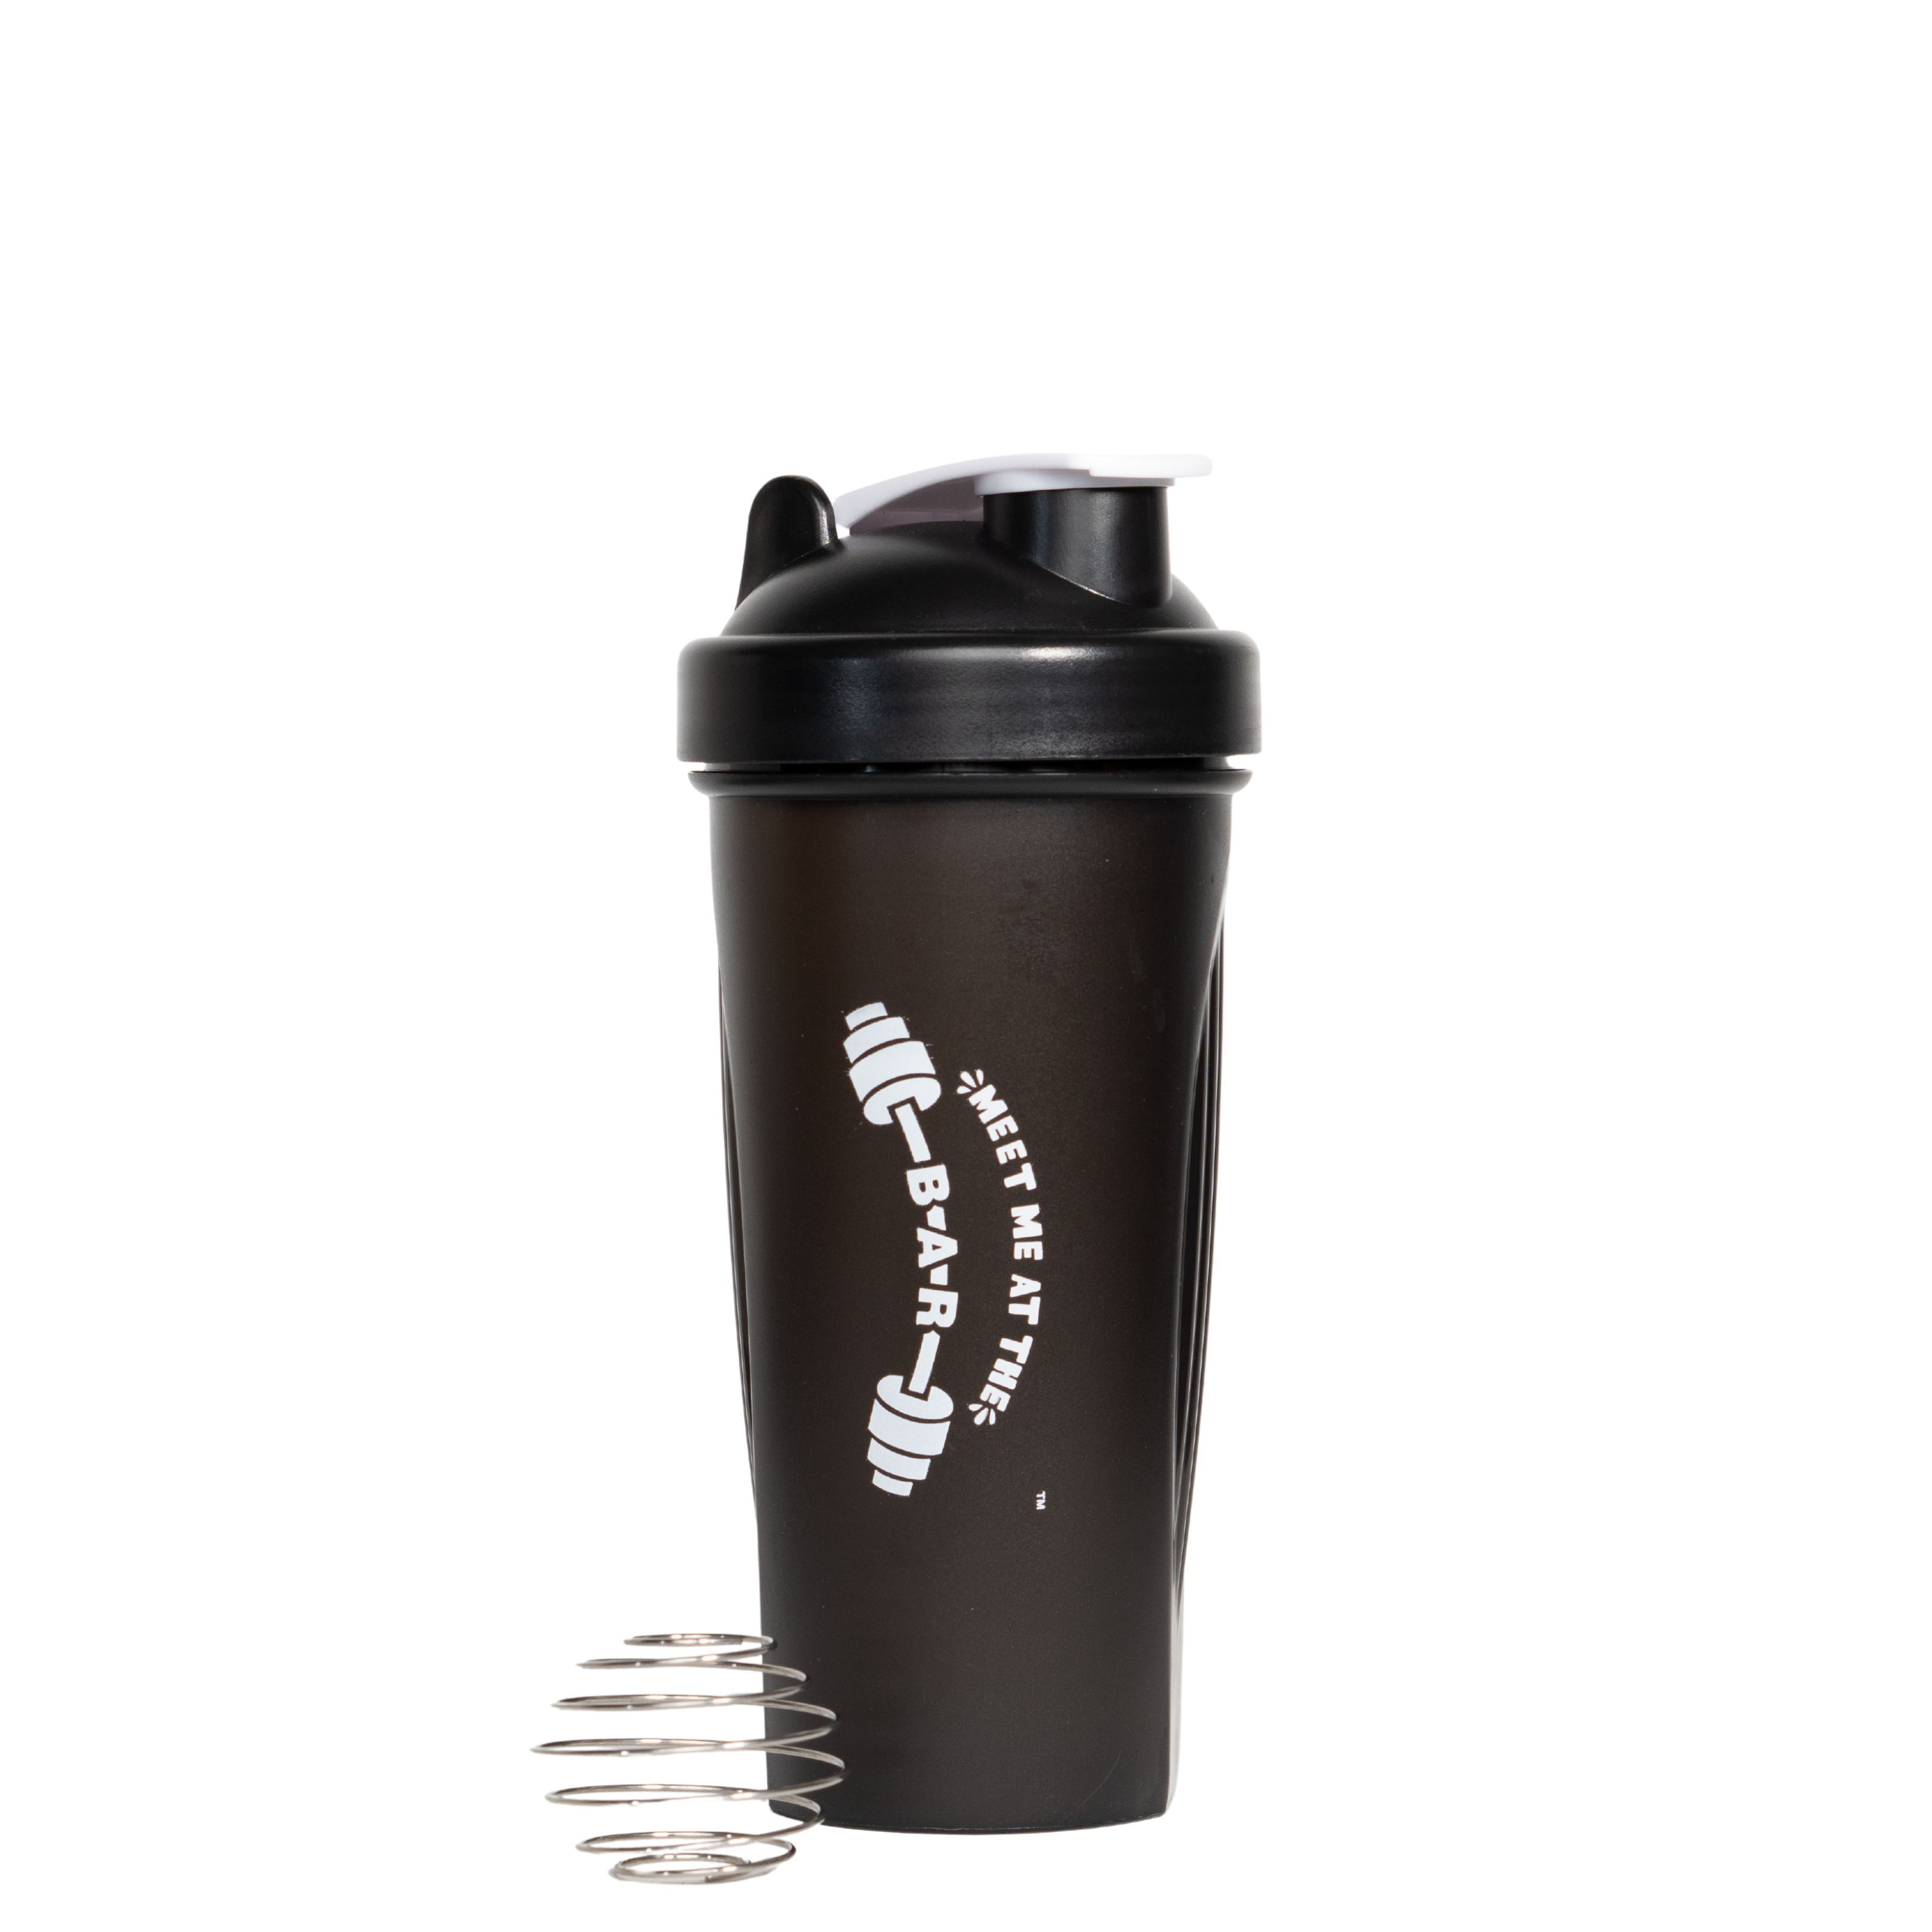 NutriFit Plus Protein Sport Shaker with Stainless Mixer 25oz BPA Free Leak Proof